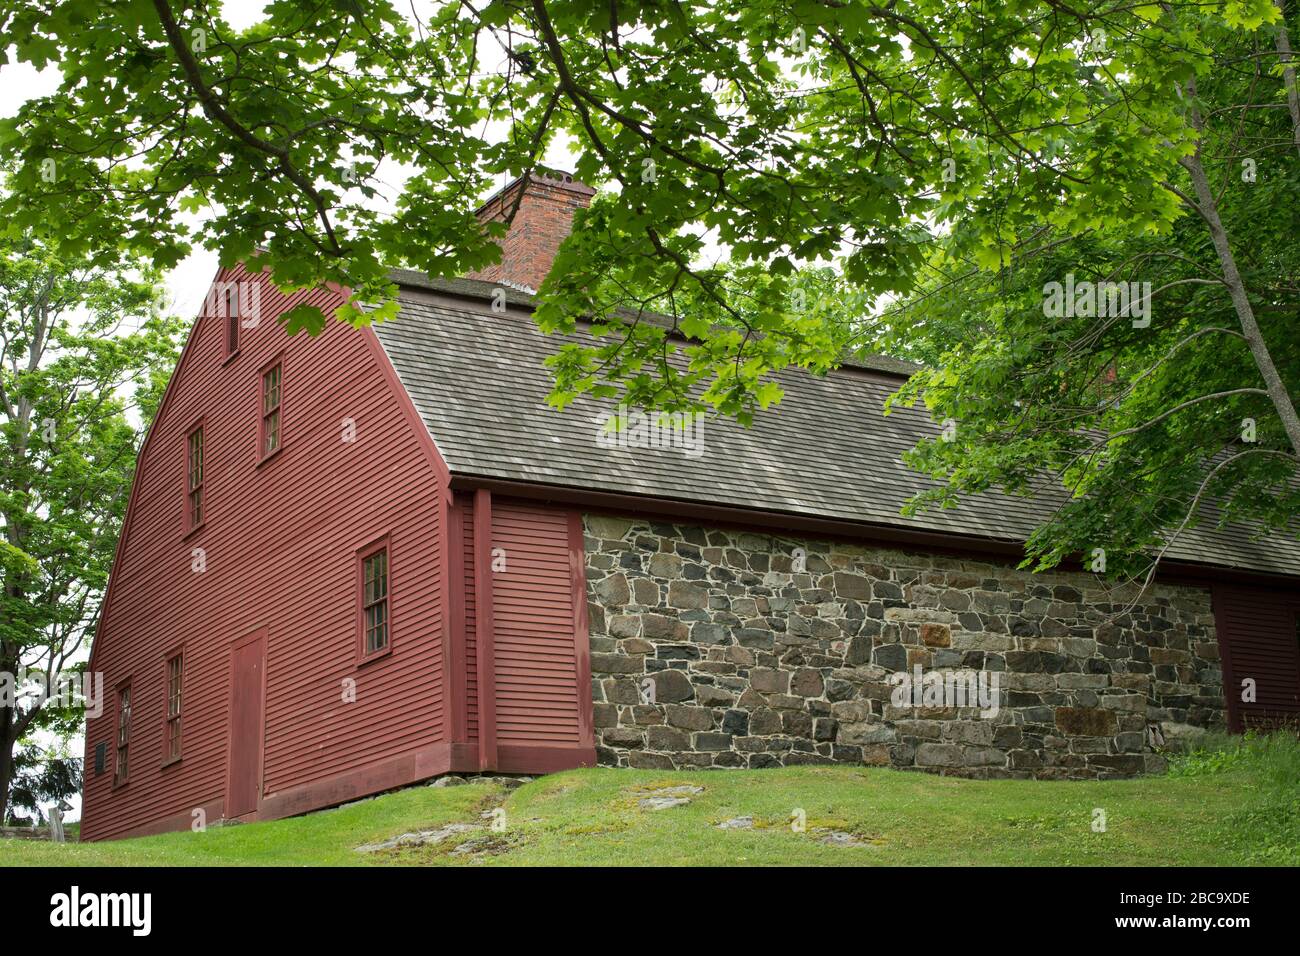 The Old Gaol, now a historical spot in York Village, Maine. was a jail many many years ago. Located on main road in center York Village. Great in summ. Stock Photo